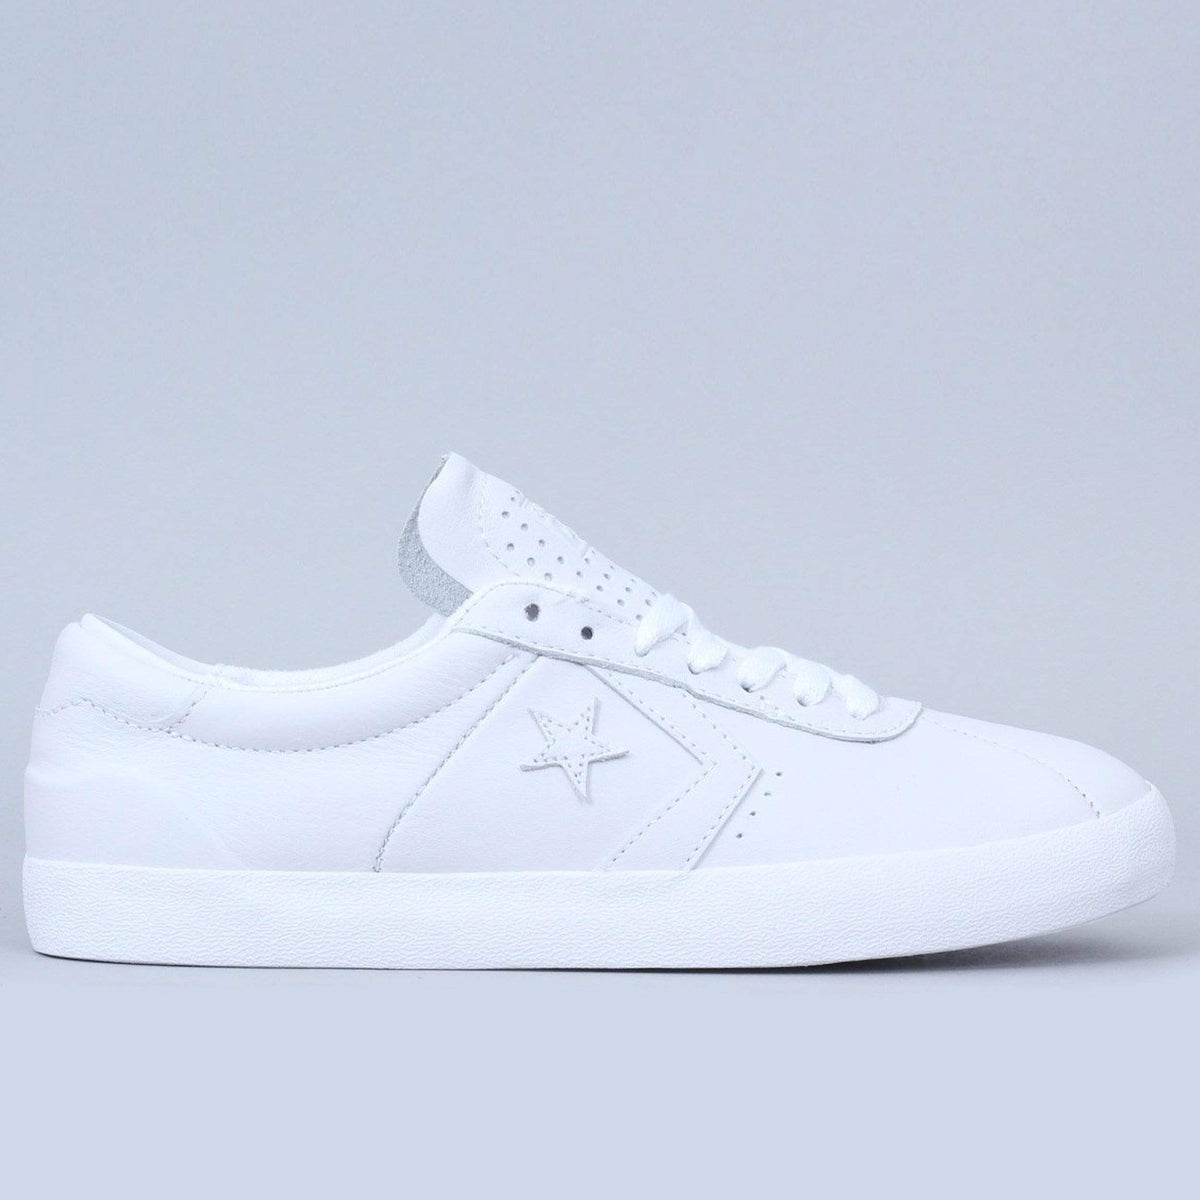 converse breakpoint ox white